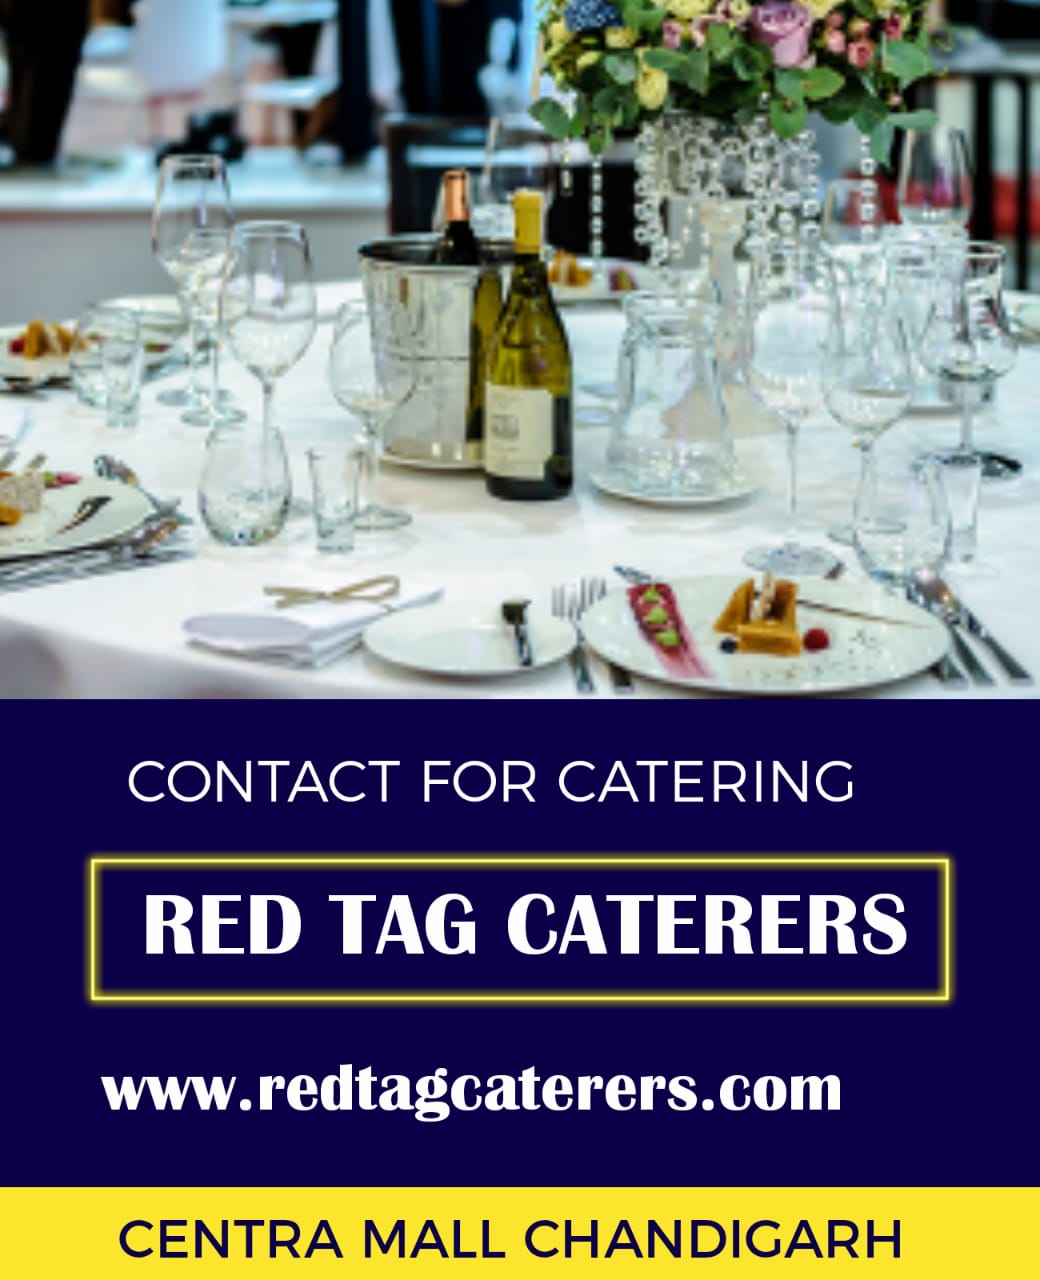 Best performance and impressive catering services in Chandigarh city | Red Tag Caterers | Responsible catering services in Chandigarh, impressive catering services in Chandigarh, best performance catering services in Chandigarh, perfect catering services in Chandigarh, best quality caterin - GL46307